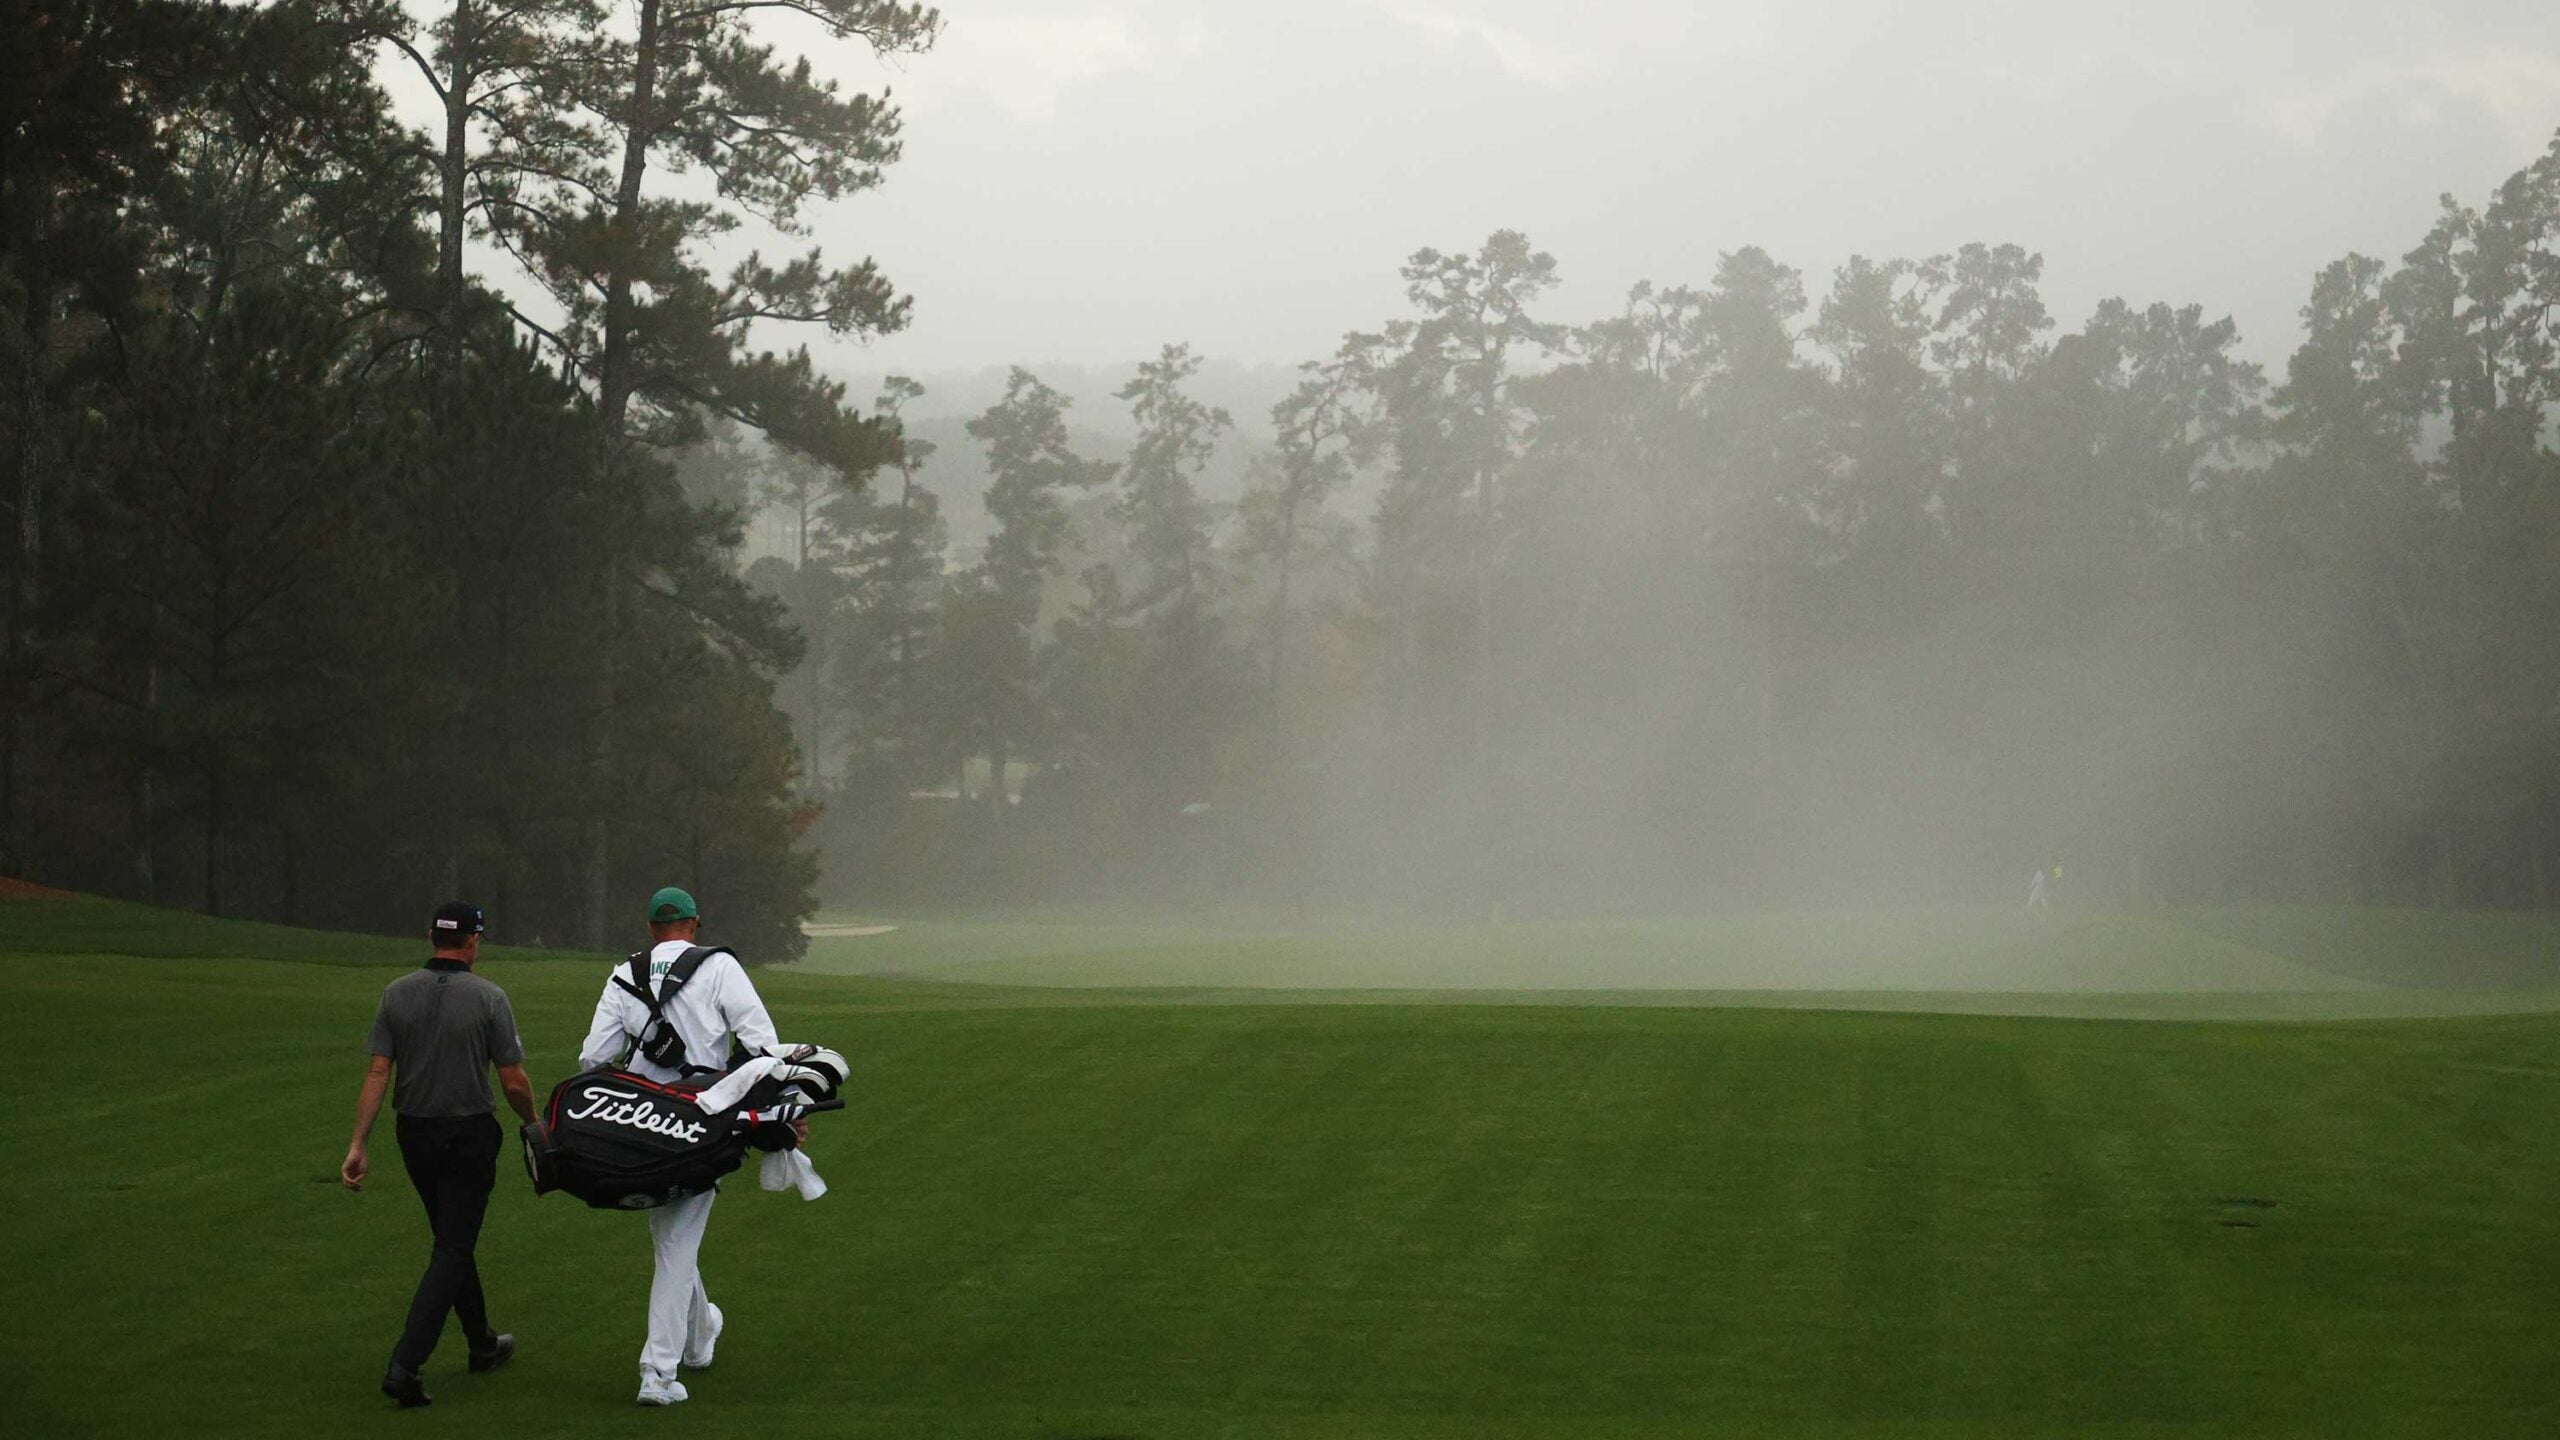 After endless wait for 2020 Masters, golf fans left to wait some more